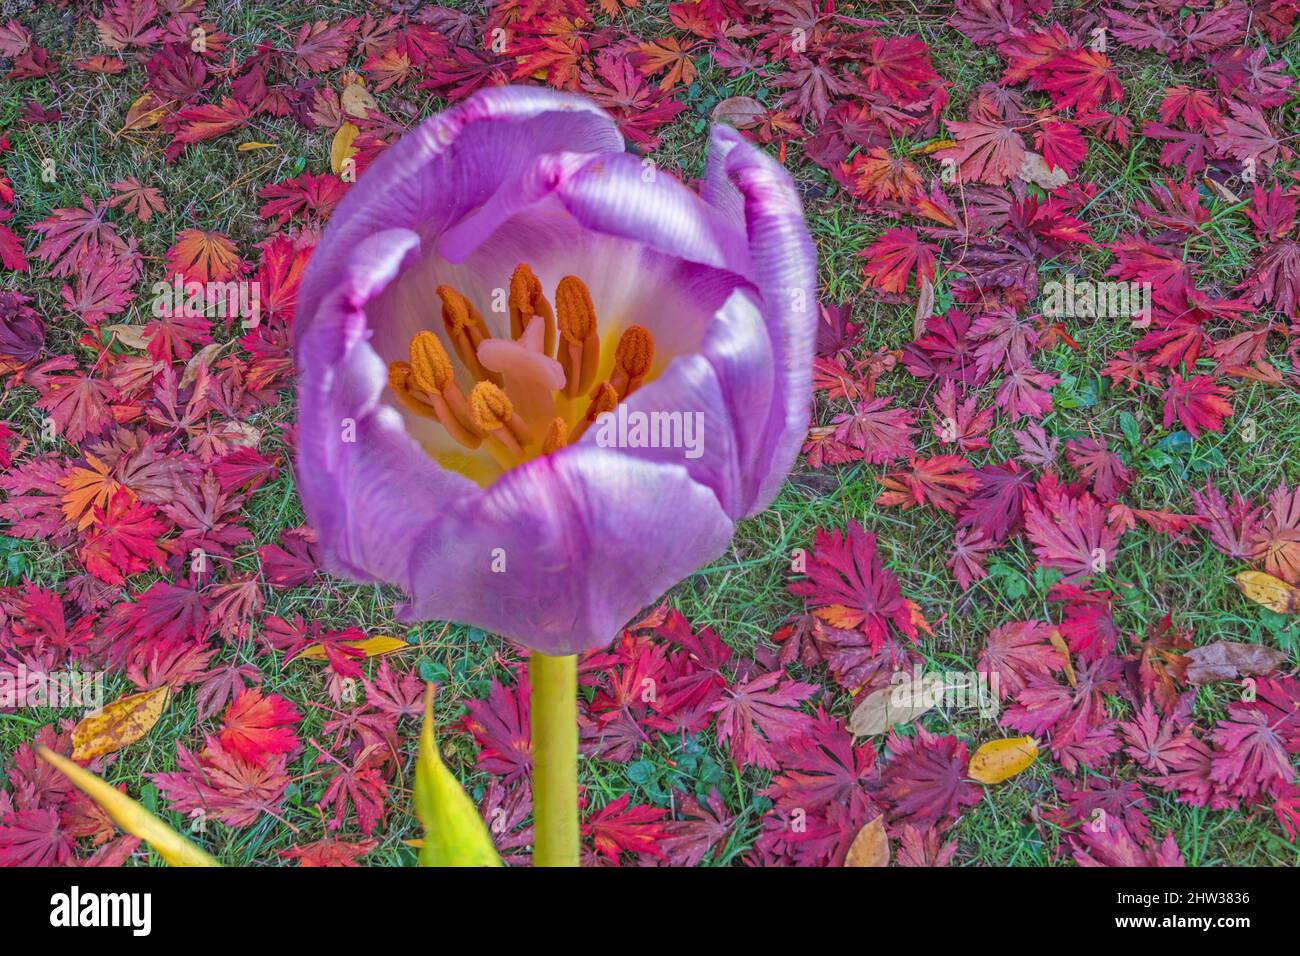 Inside a beautiful Tulip against a red leaf lawn Stock Photo